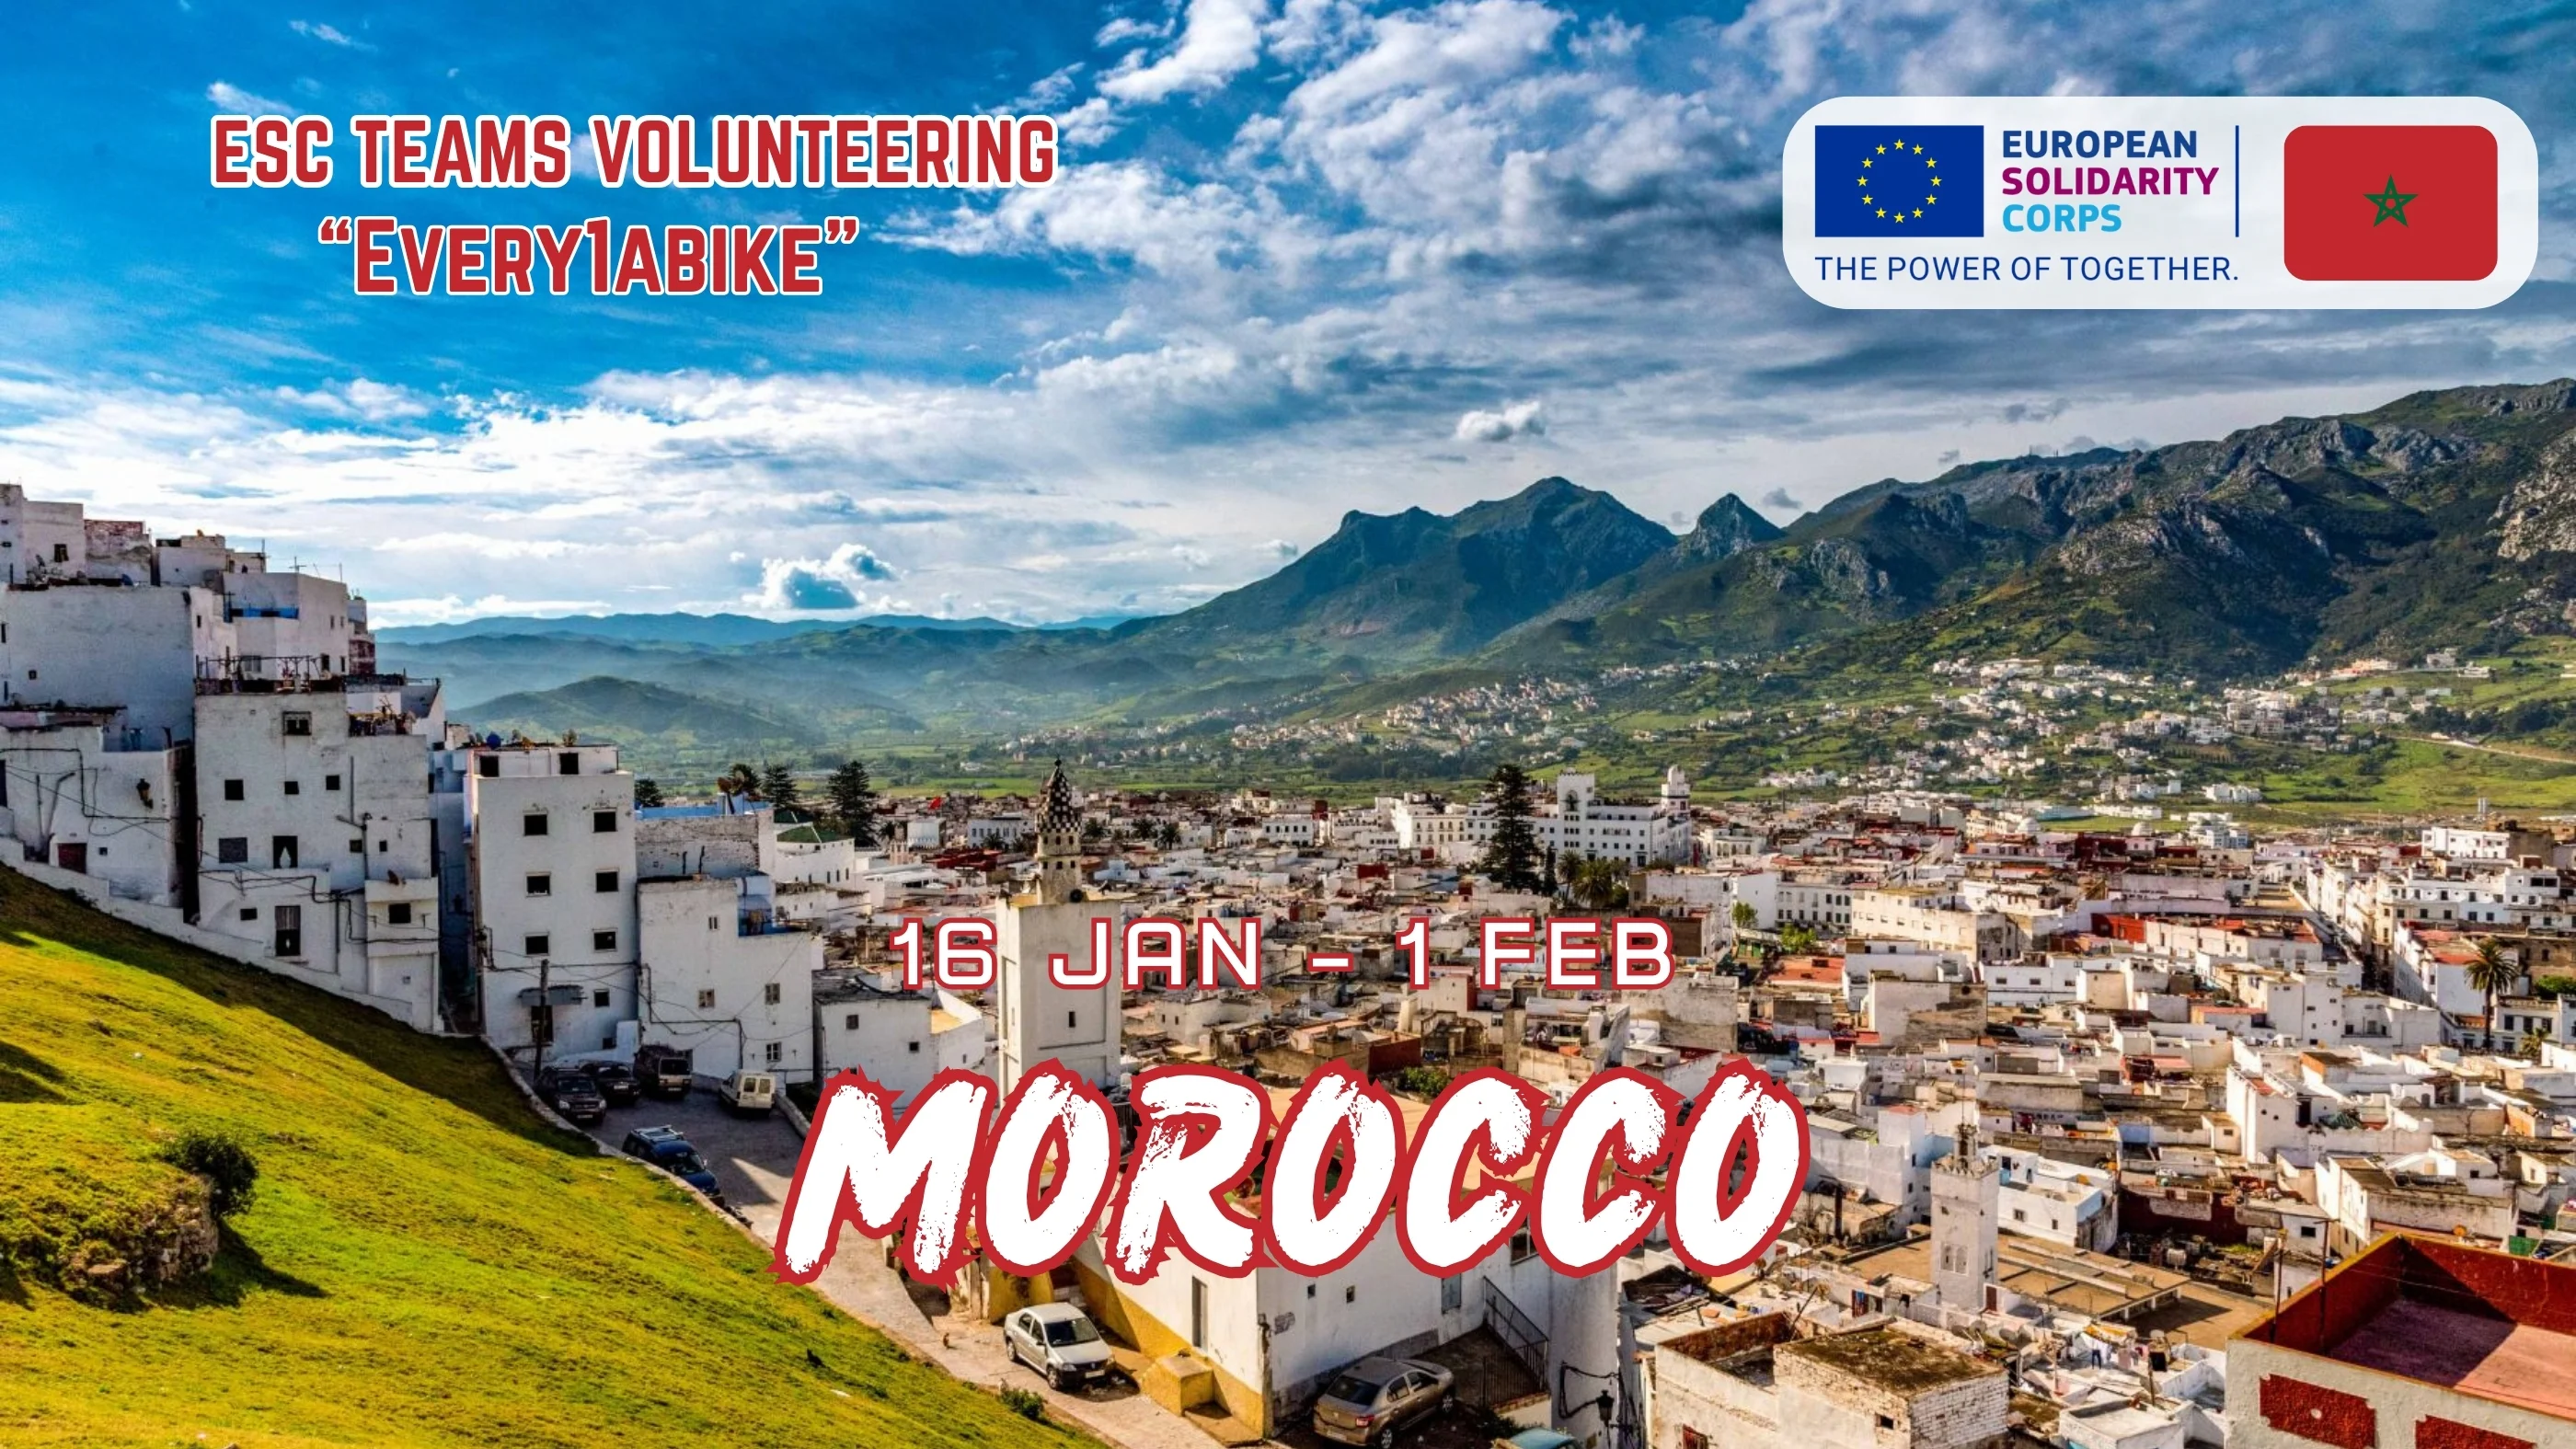 ESC Volunteering "Every1abike" for 2 Weeks in Morocco  (Fully Funded)